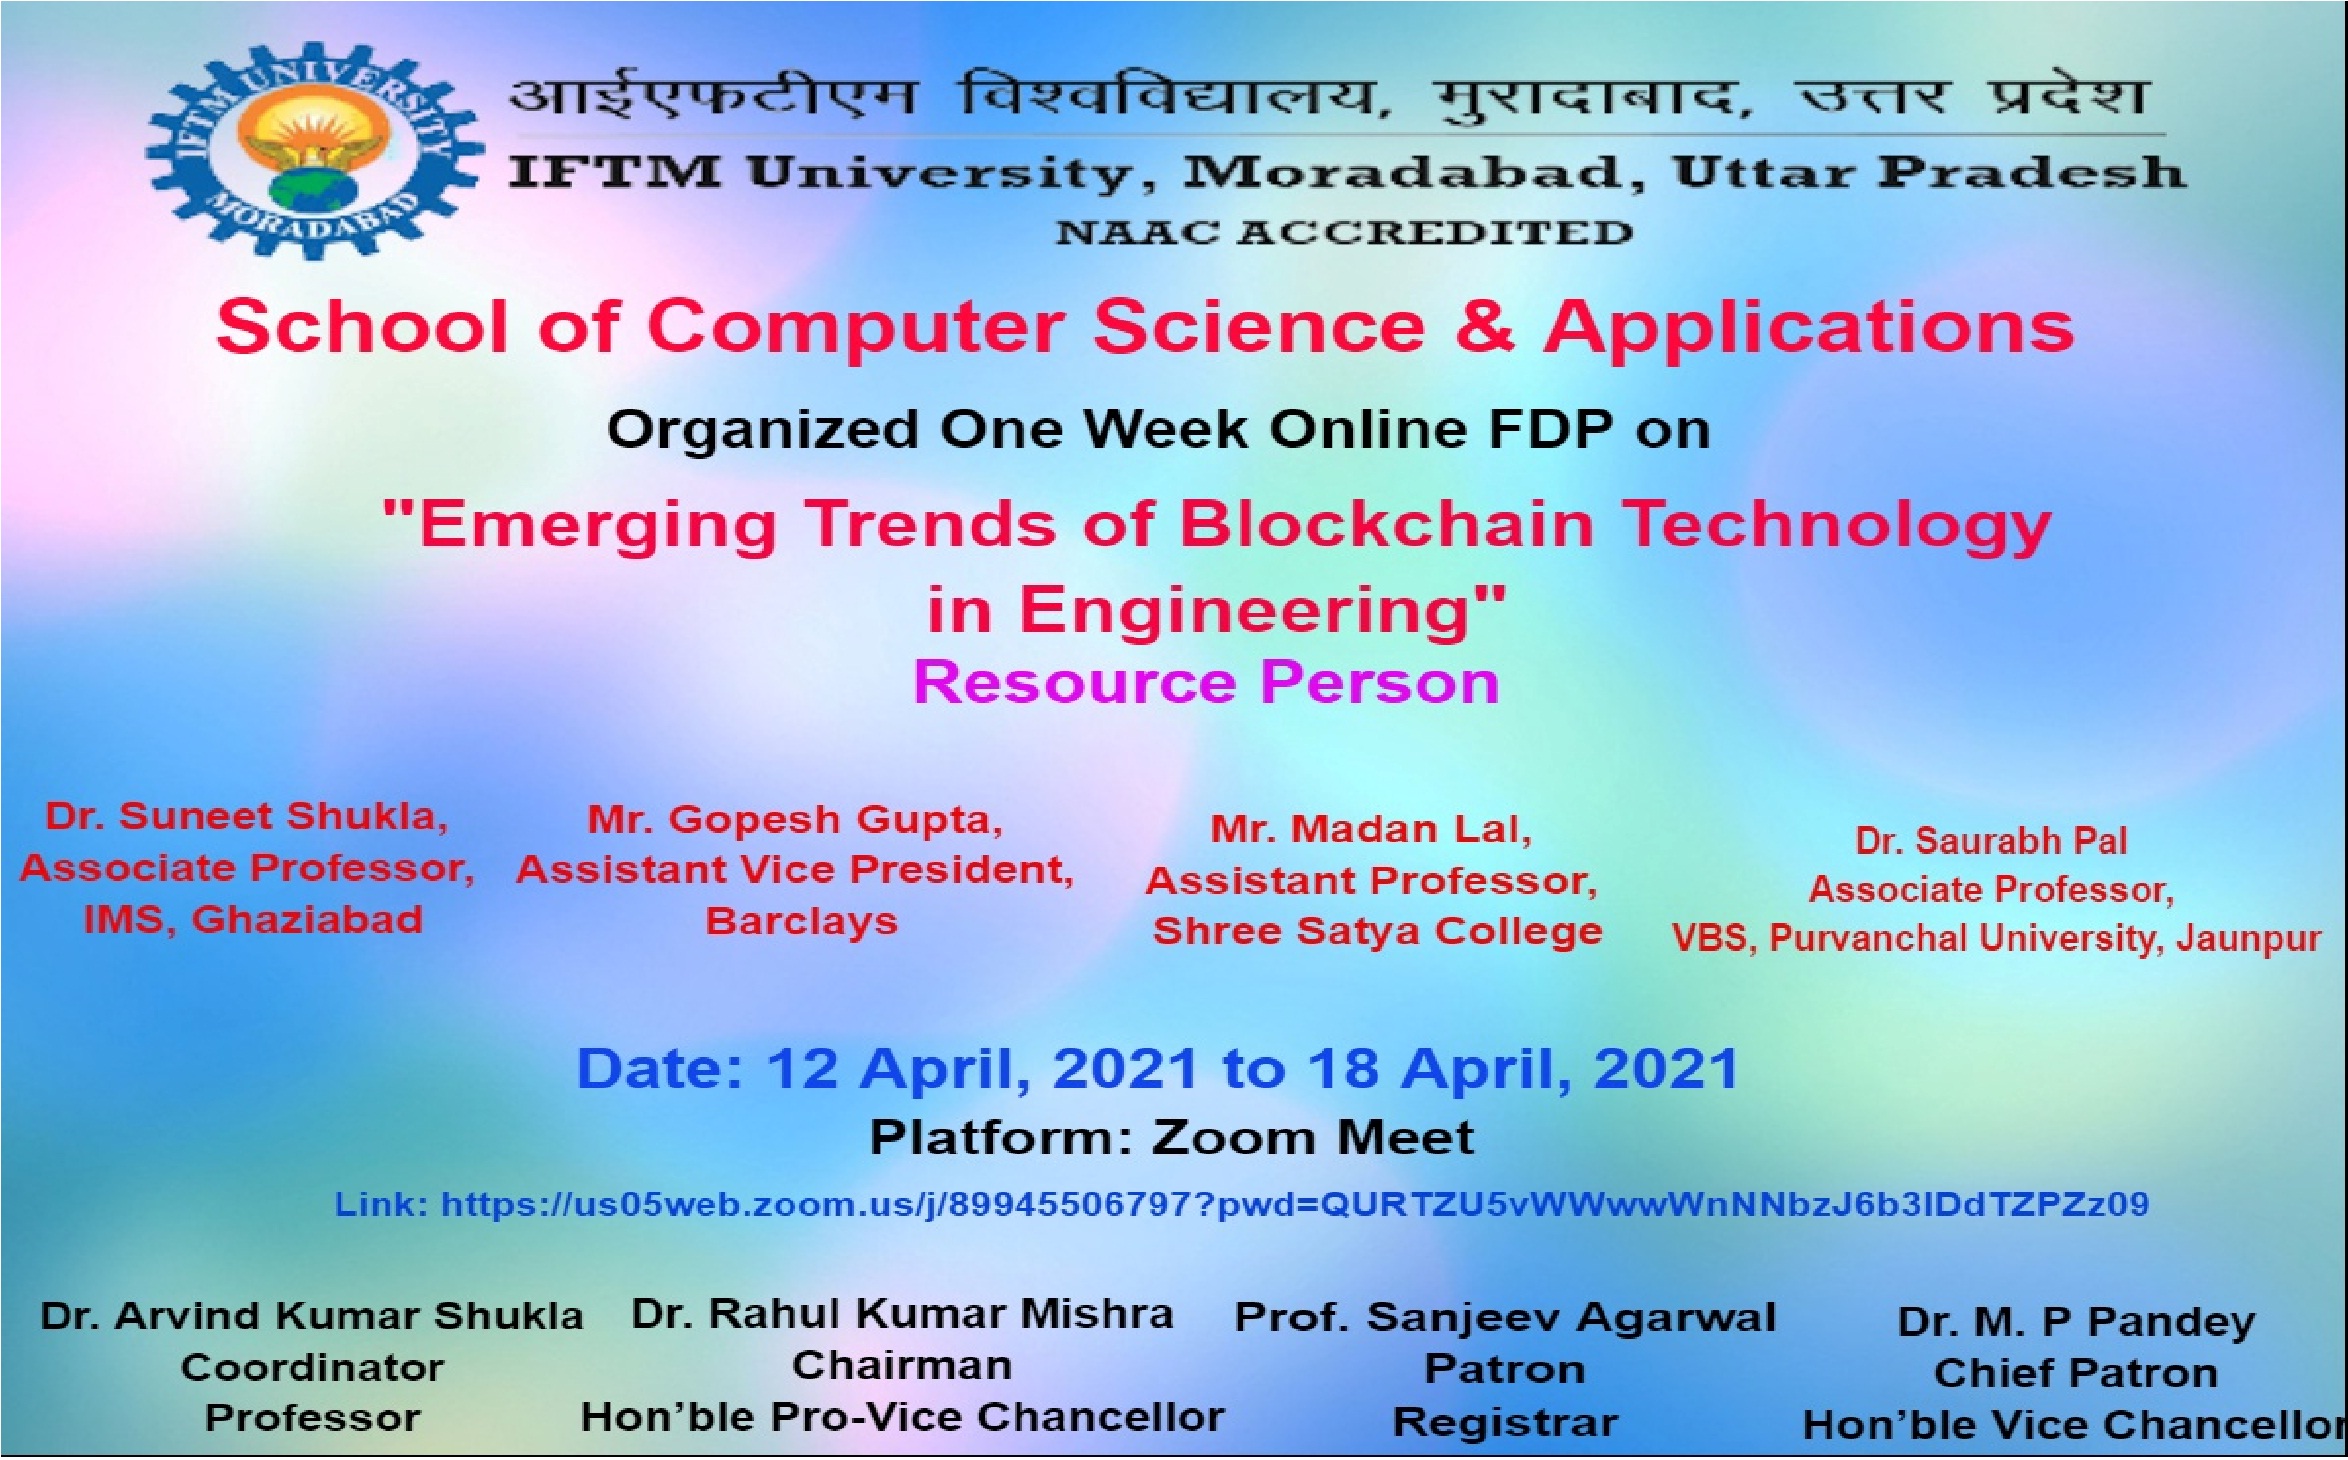 Faculty Development Programme on Emerging Trends of Blockchain Technology in Engineering